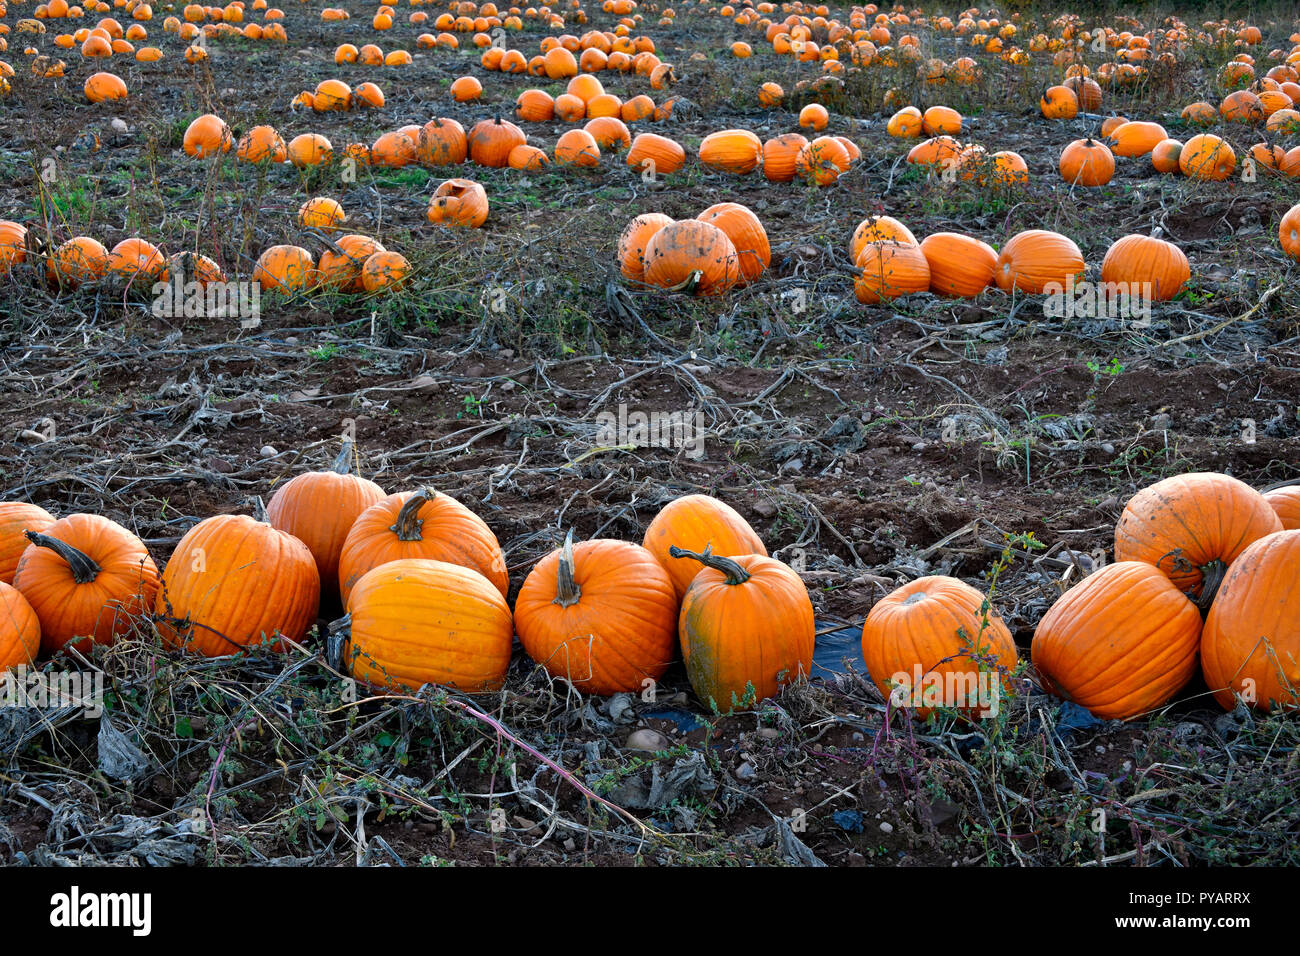 A horizontal image of a farm field with pumpkins ready for harvest in rural Sussex New Brunswick Canada Stock Photo